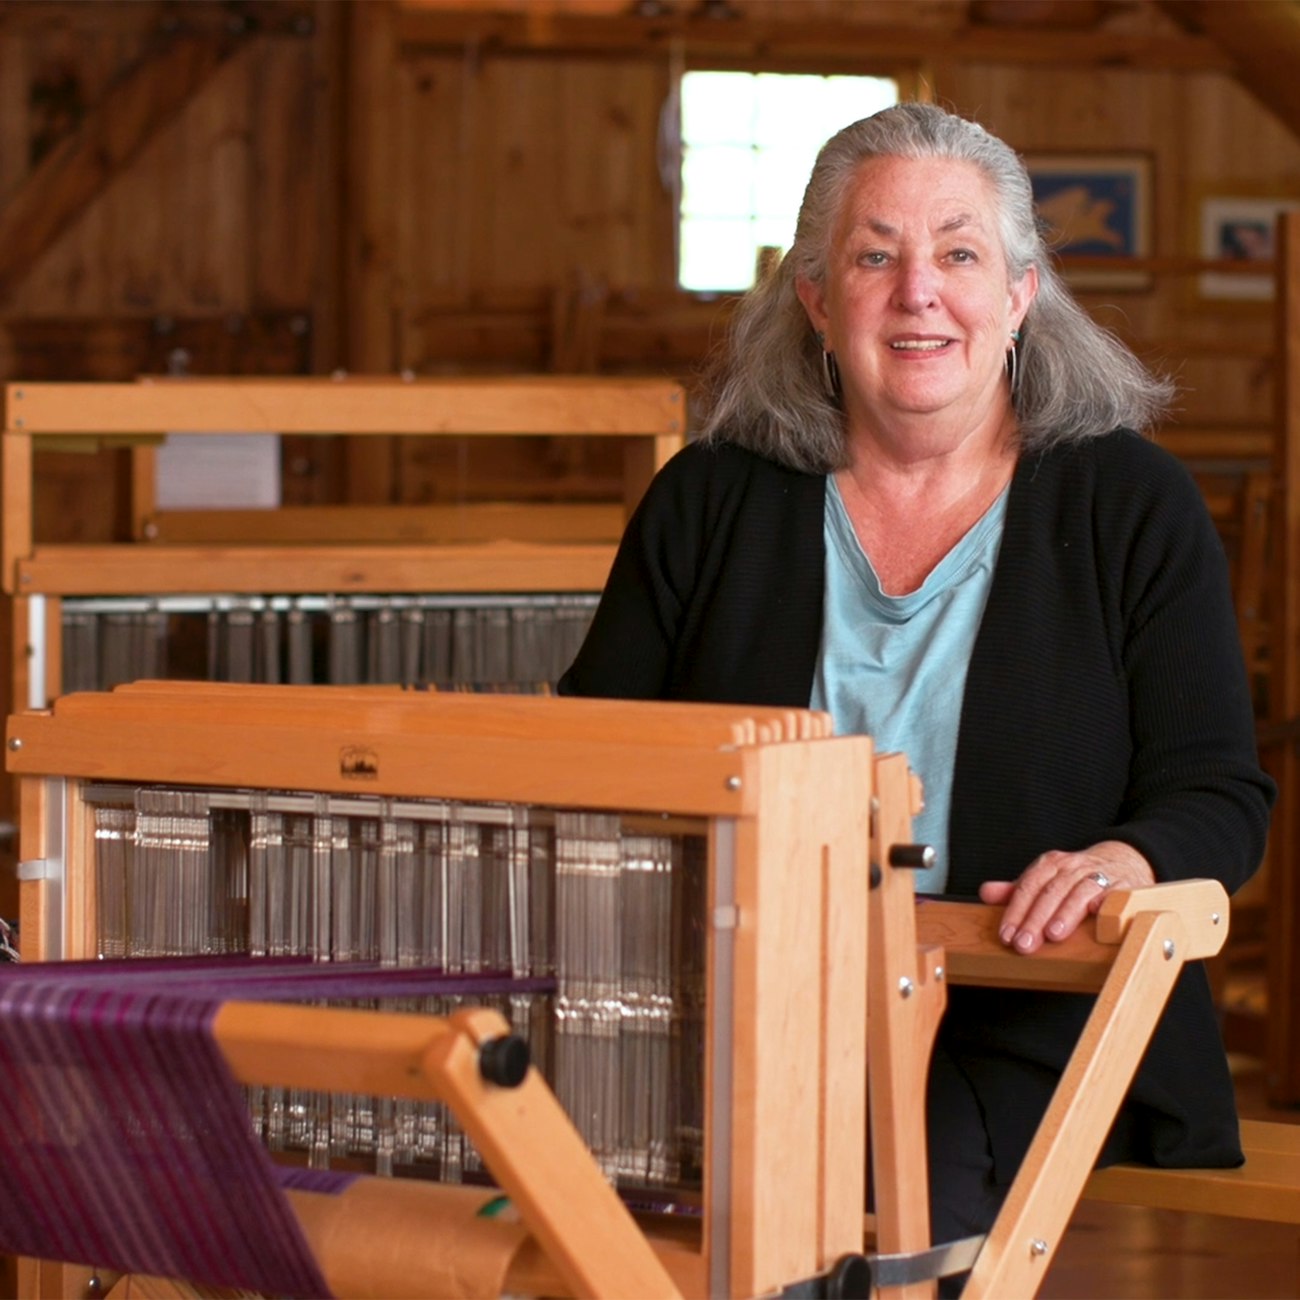 Learning the loom